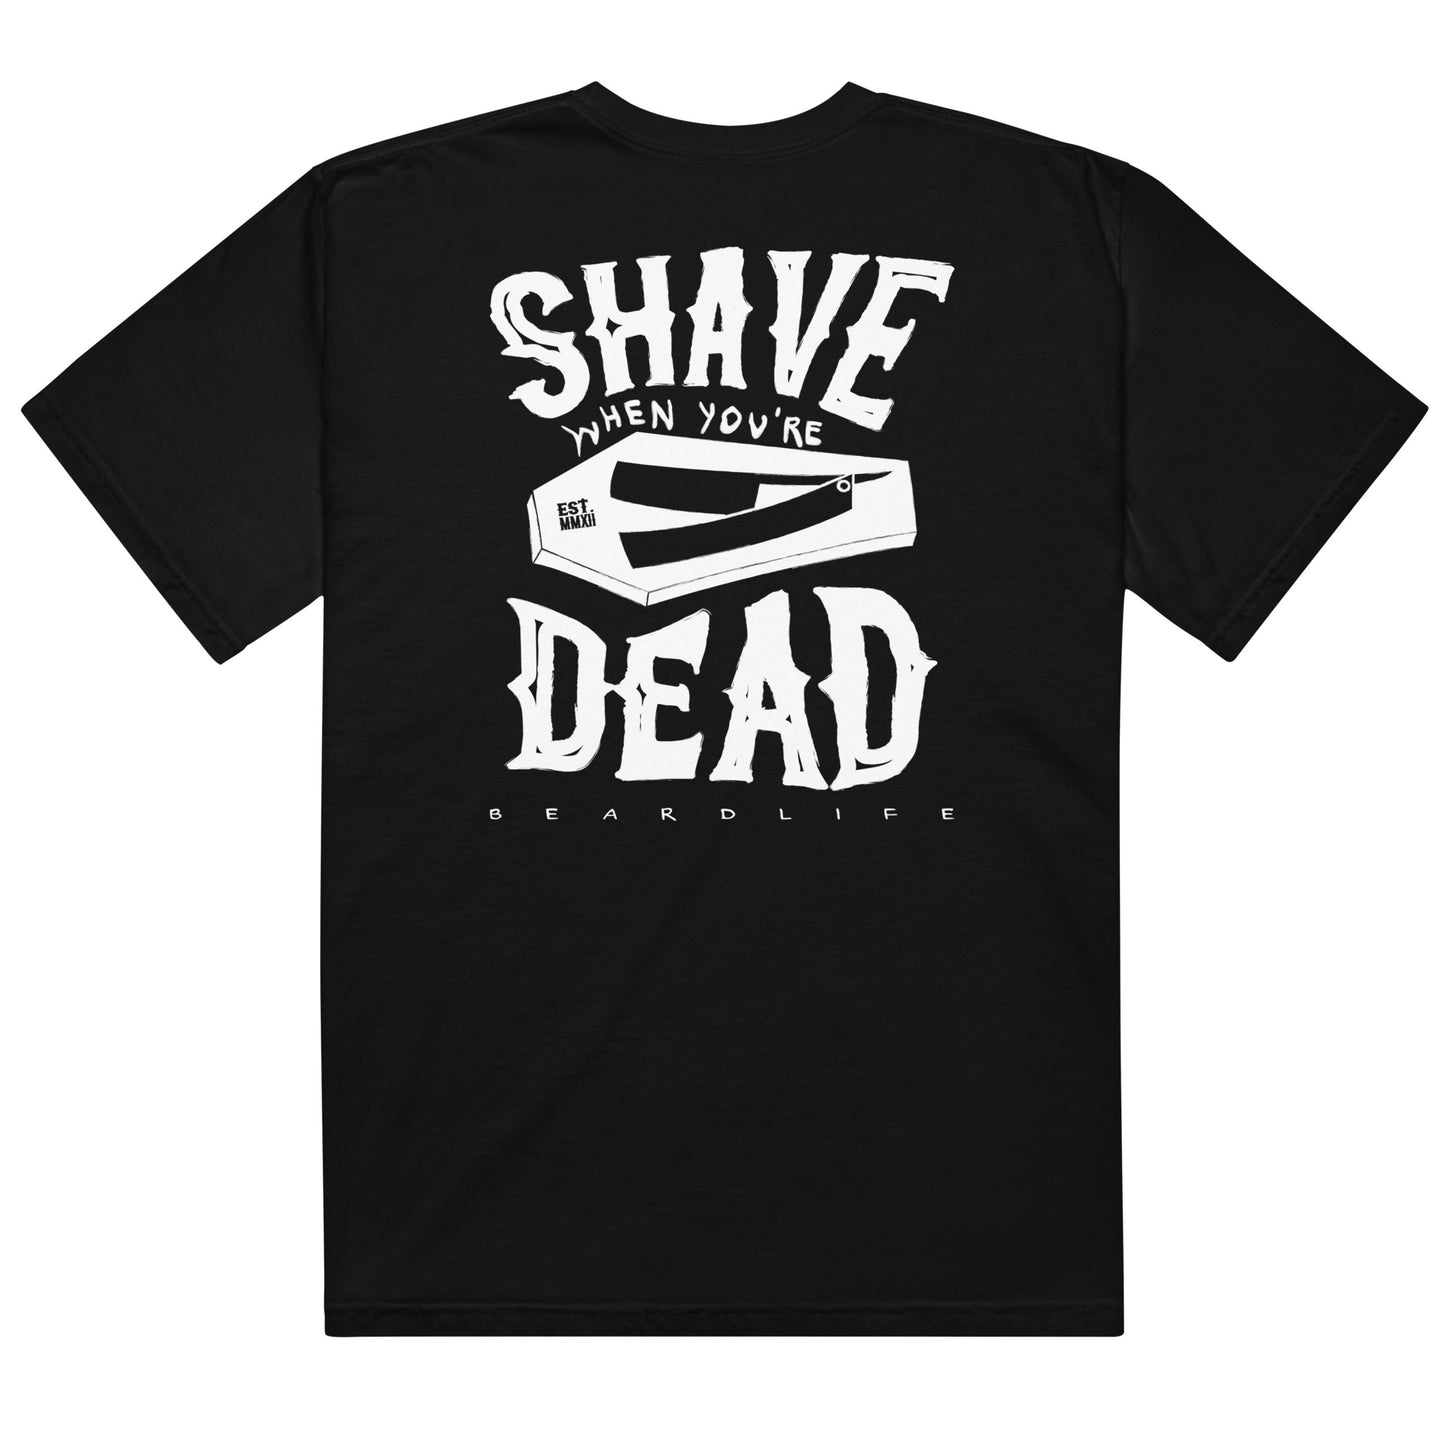 Beard Life - Shave When You're Dead Tee